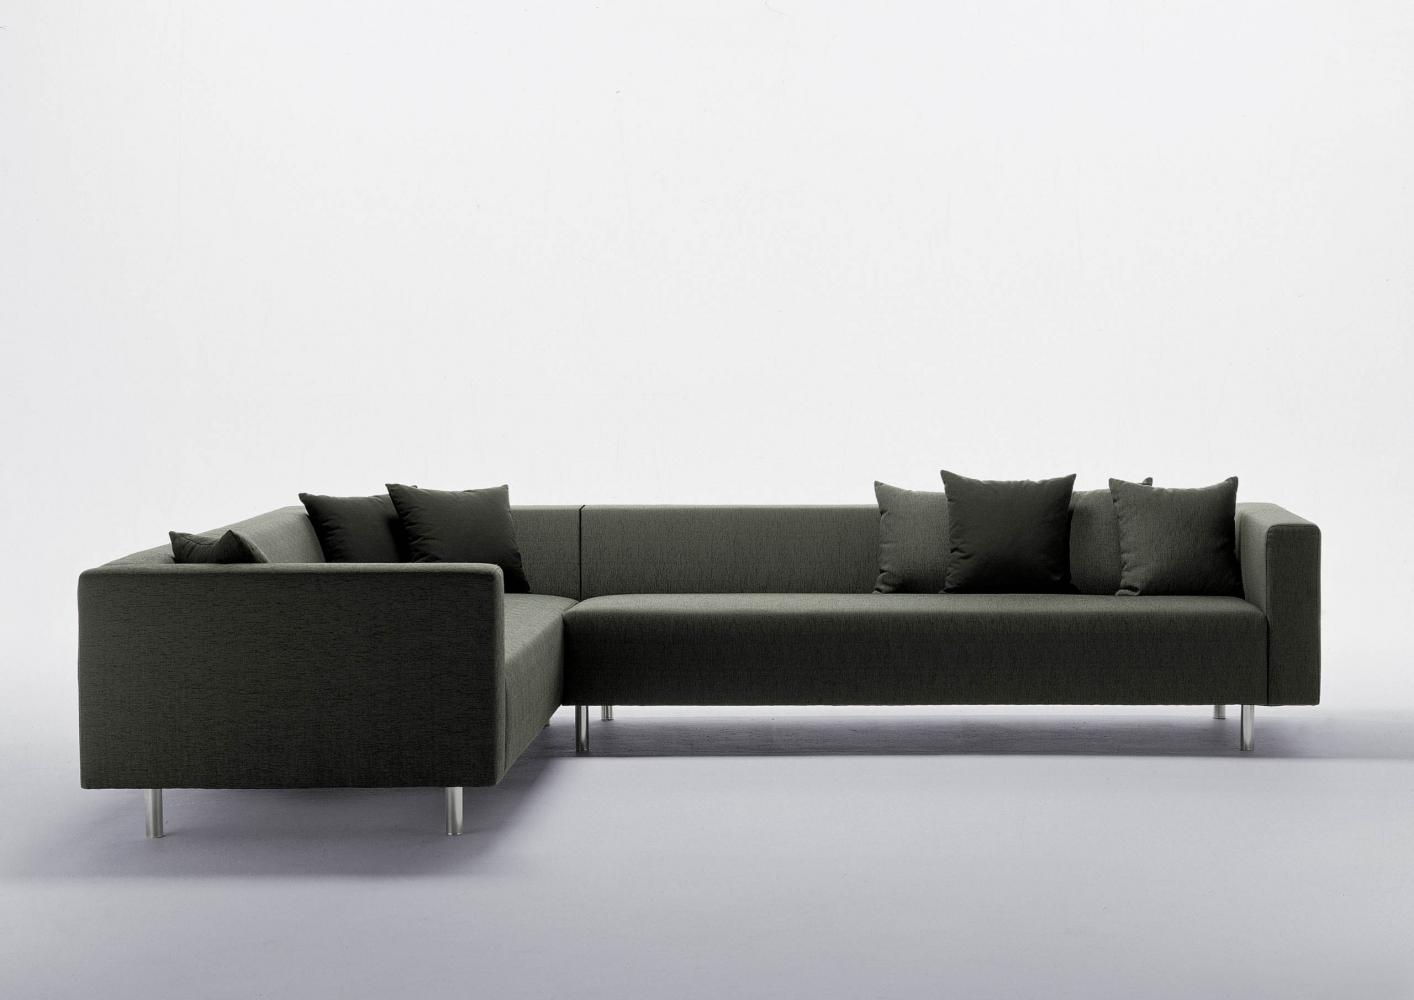 Orchestra modern modular customizable system of coordinated padded luxury sofas